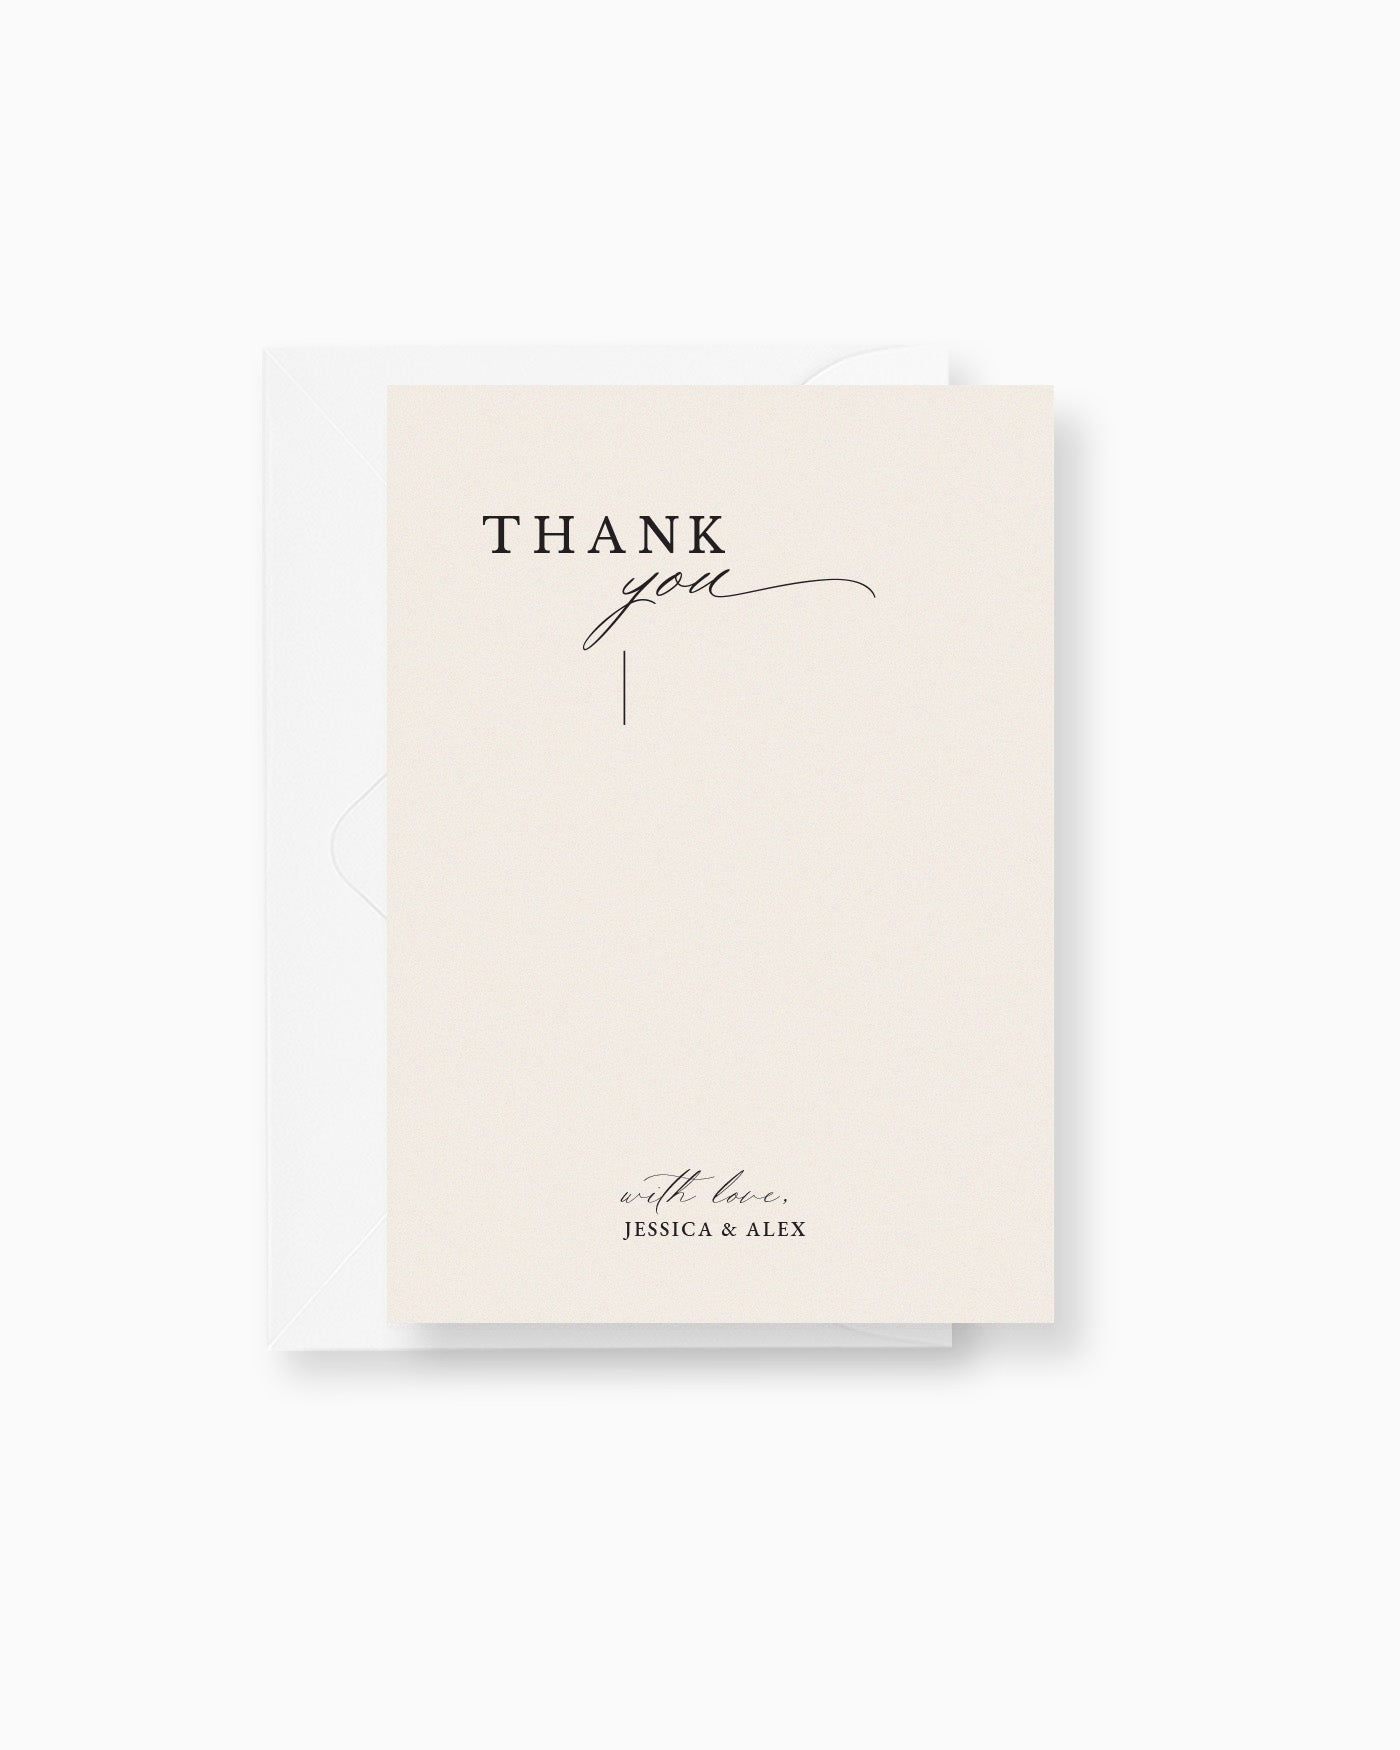 Peppermint Press Stationery Suite Milan Thank you Card